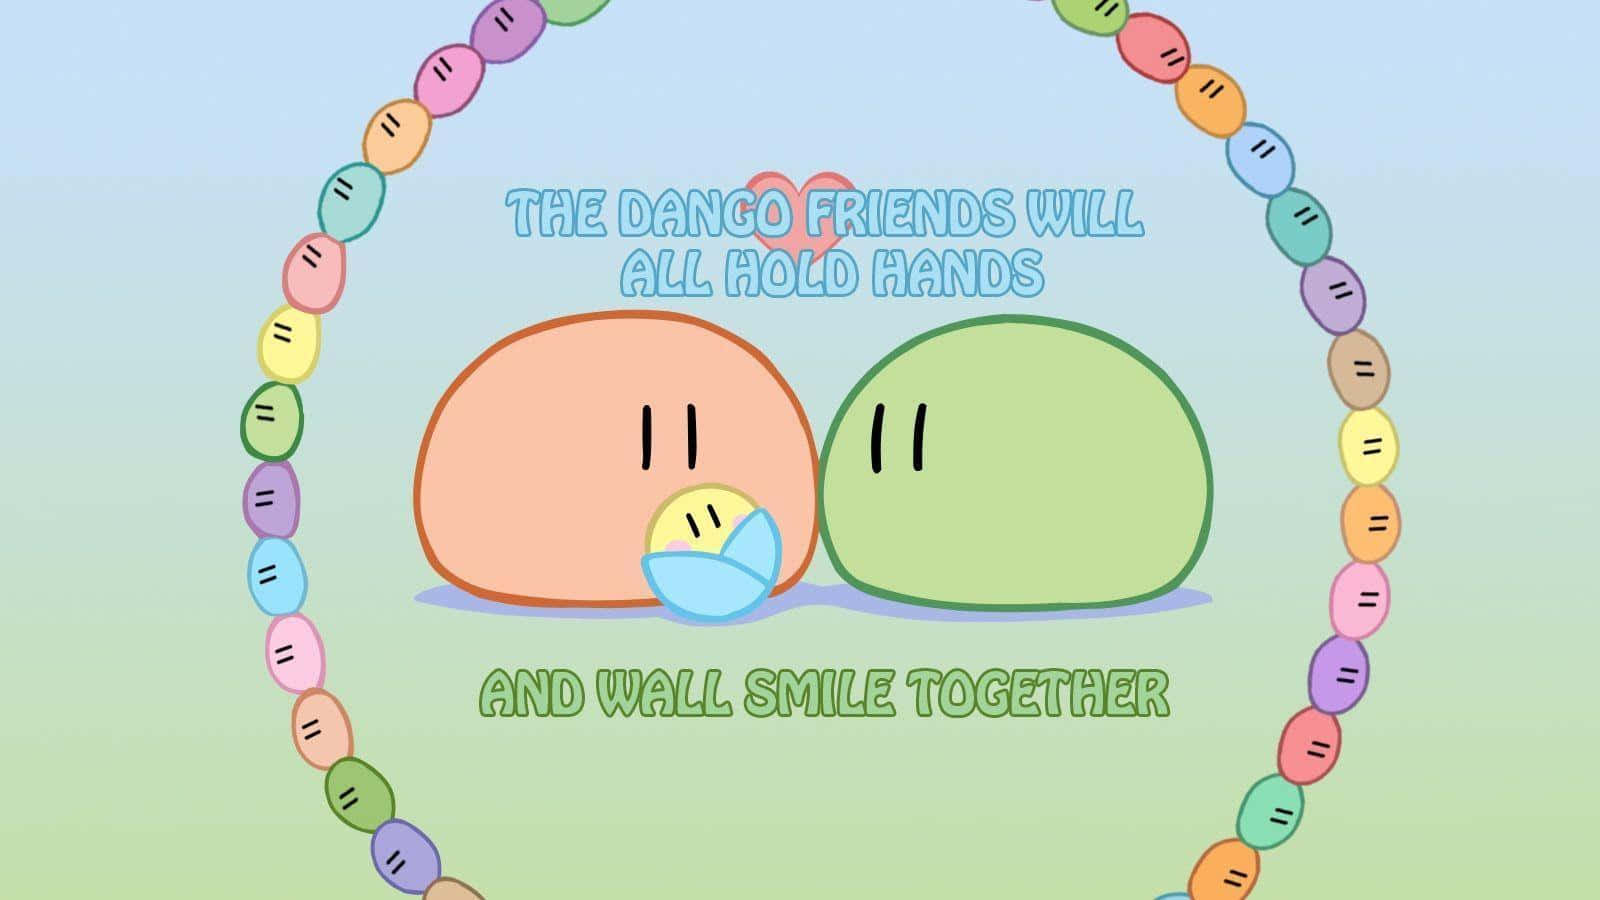 Cheerful Dangos From The Anime Series Clannad Wallpaper